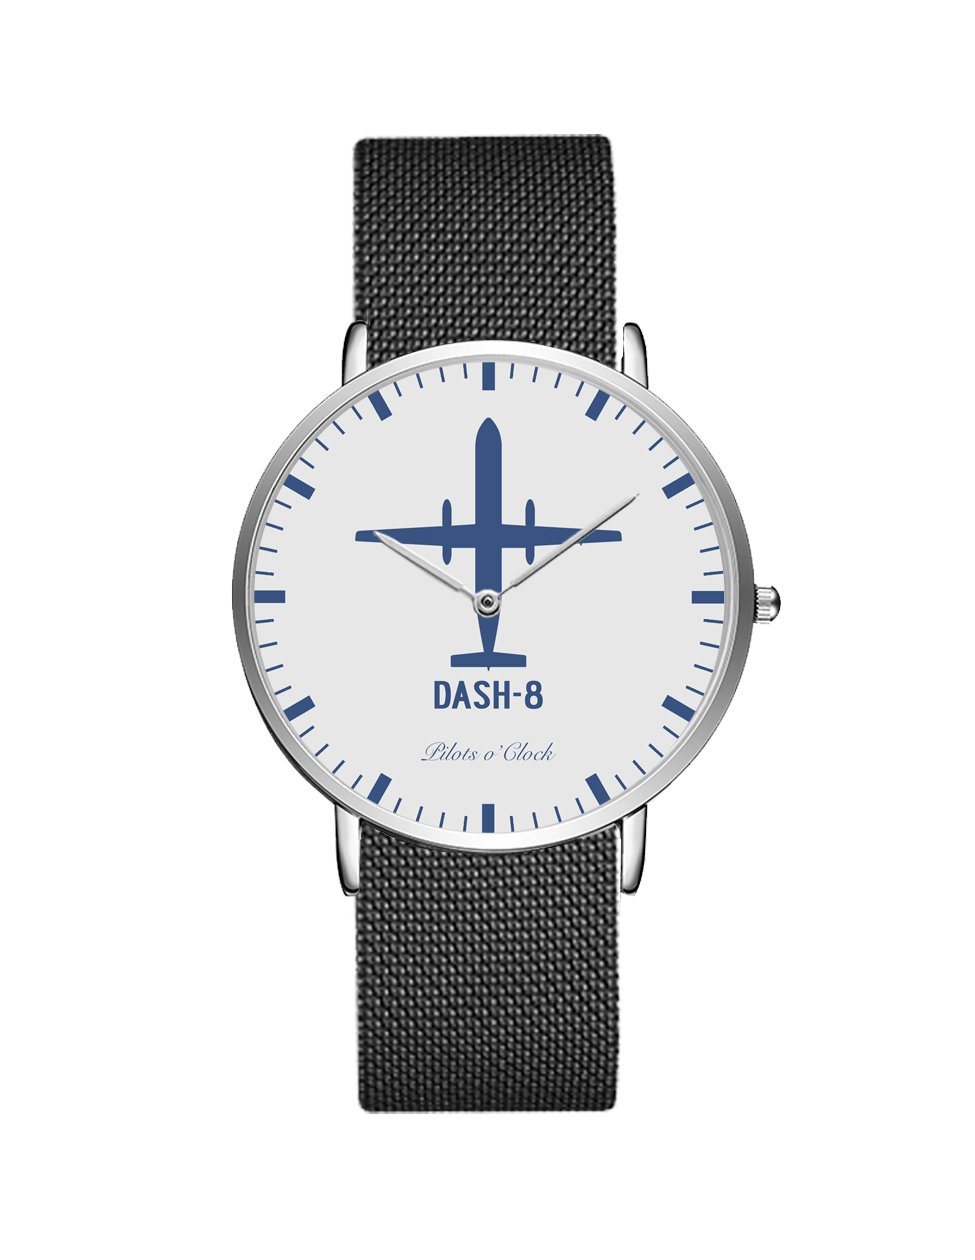 Bombardier Dash-8 Stainless Steel Strap Watches Pilot Eyes Store Silver & Black Stainless Steel Strap 